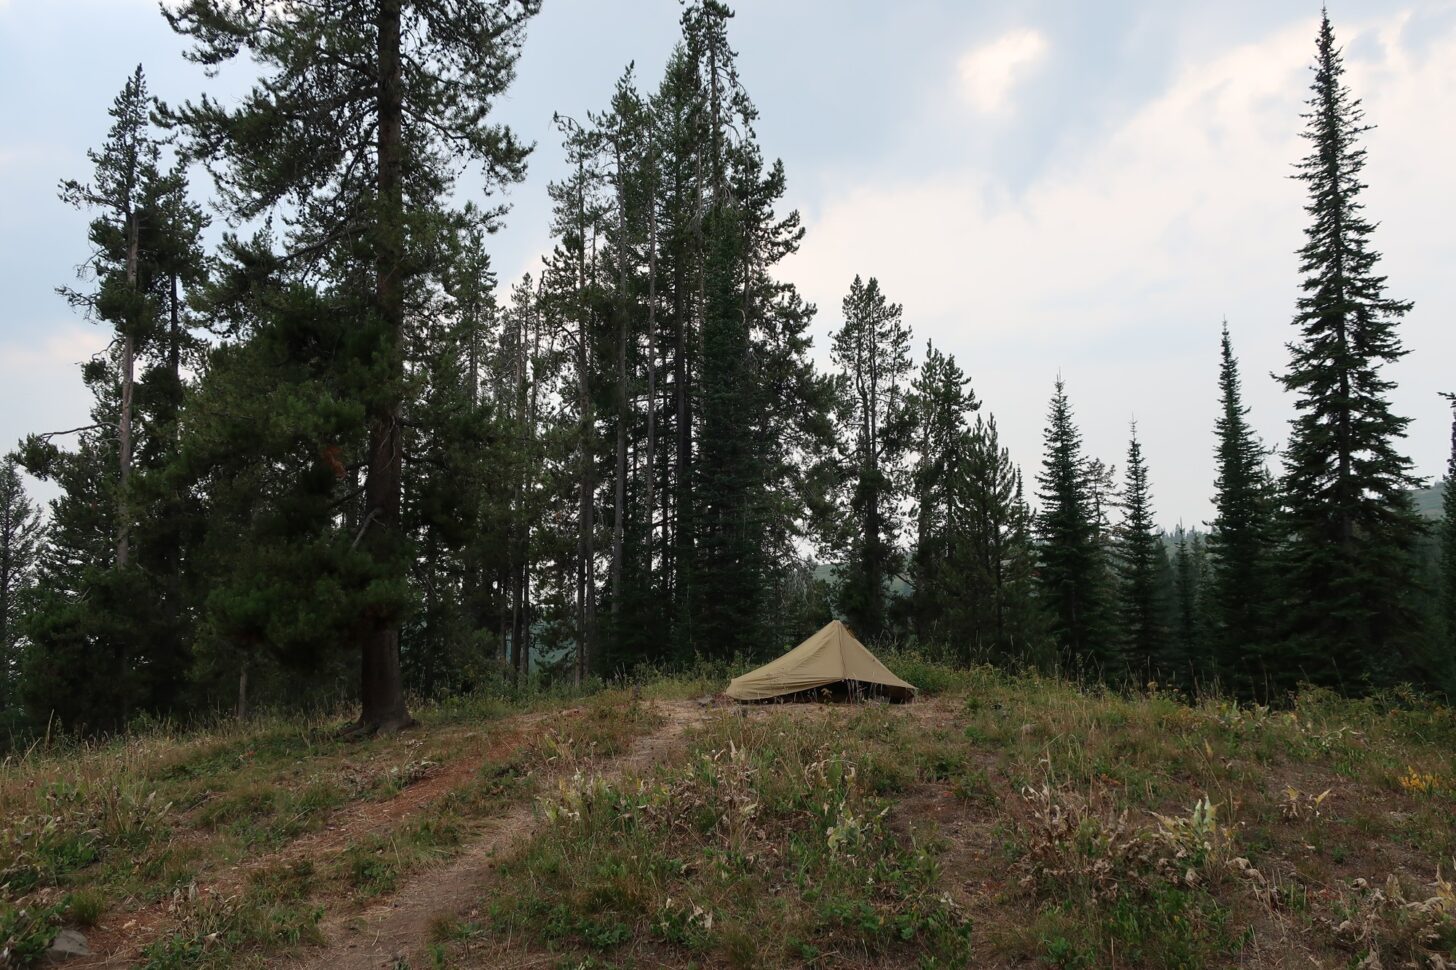 A tent in a forested setting at sunset.